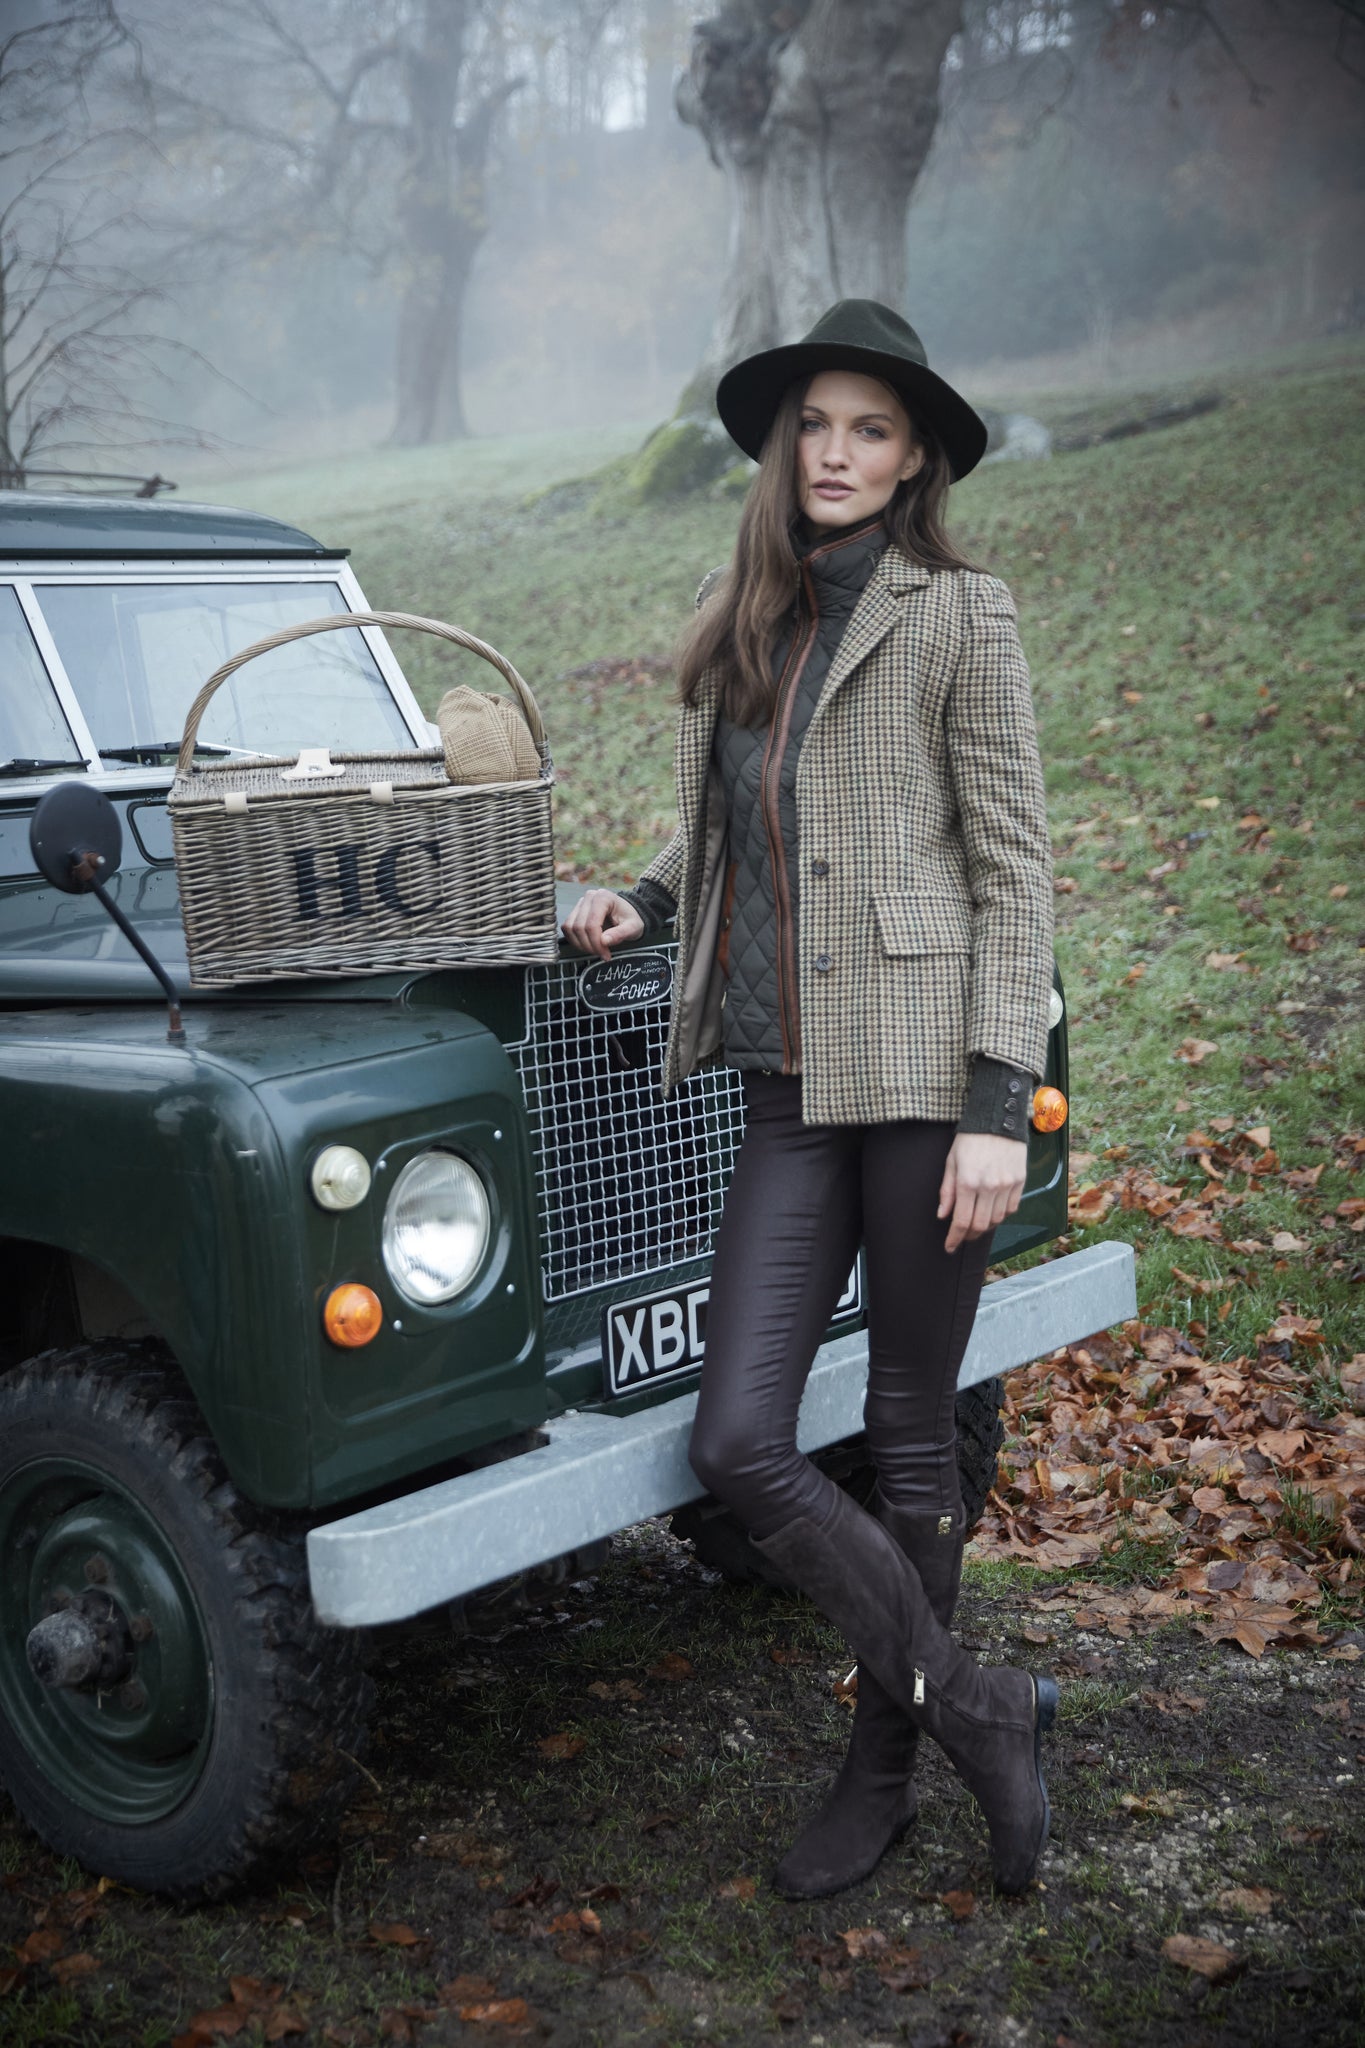 womens classic slim fit single breasted blazer in green tan and brown houndstooth tweed with lower patch pockets with concealed button flap contrast khaki suede shoulder gun patch with elbow patches and horn button finish on cuffs and front worn with diamond quilt khaki gilet chocolate wet look trousers and chocolate knee high boots 